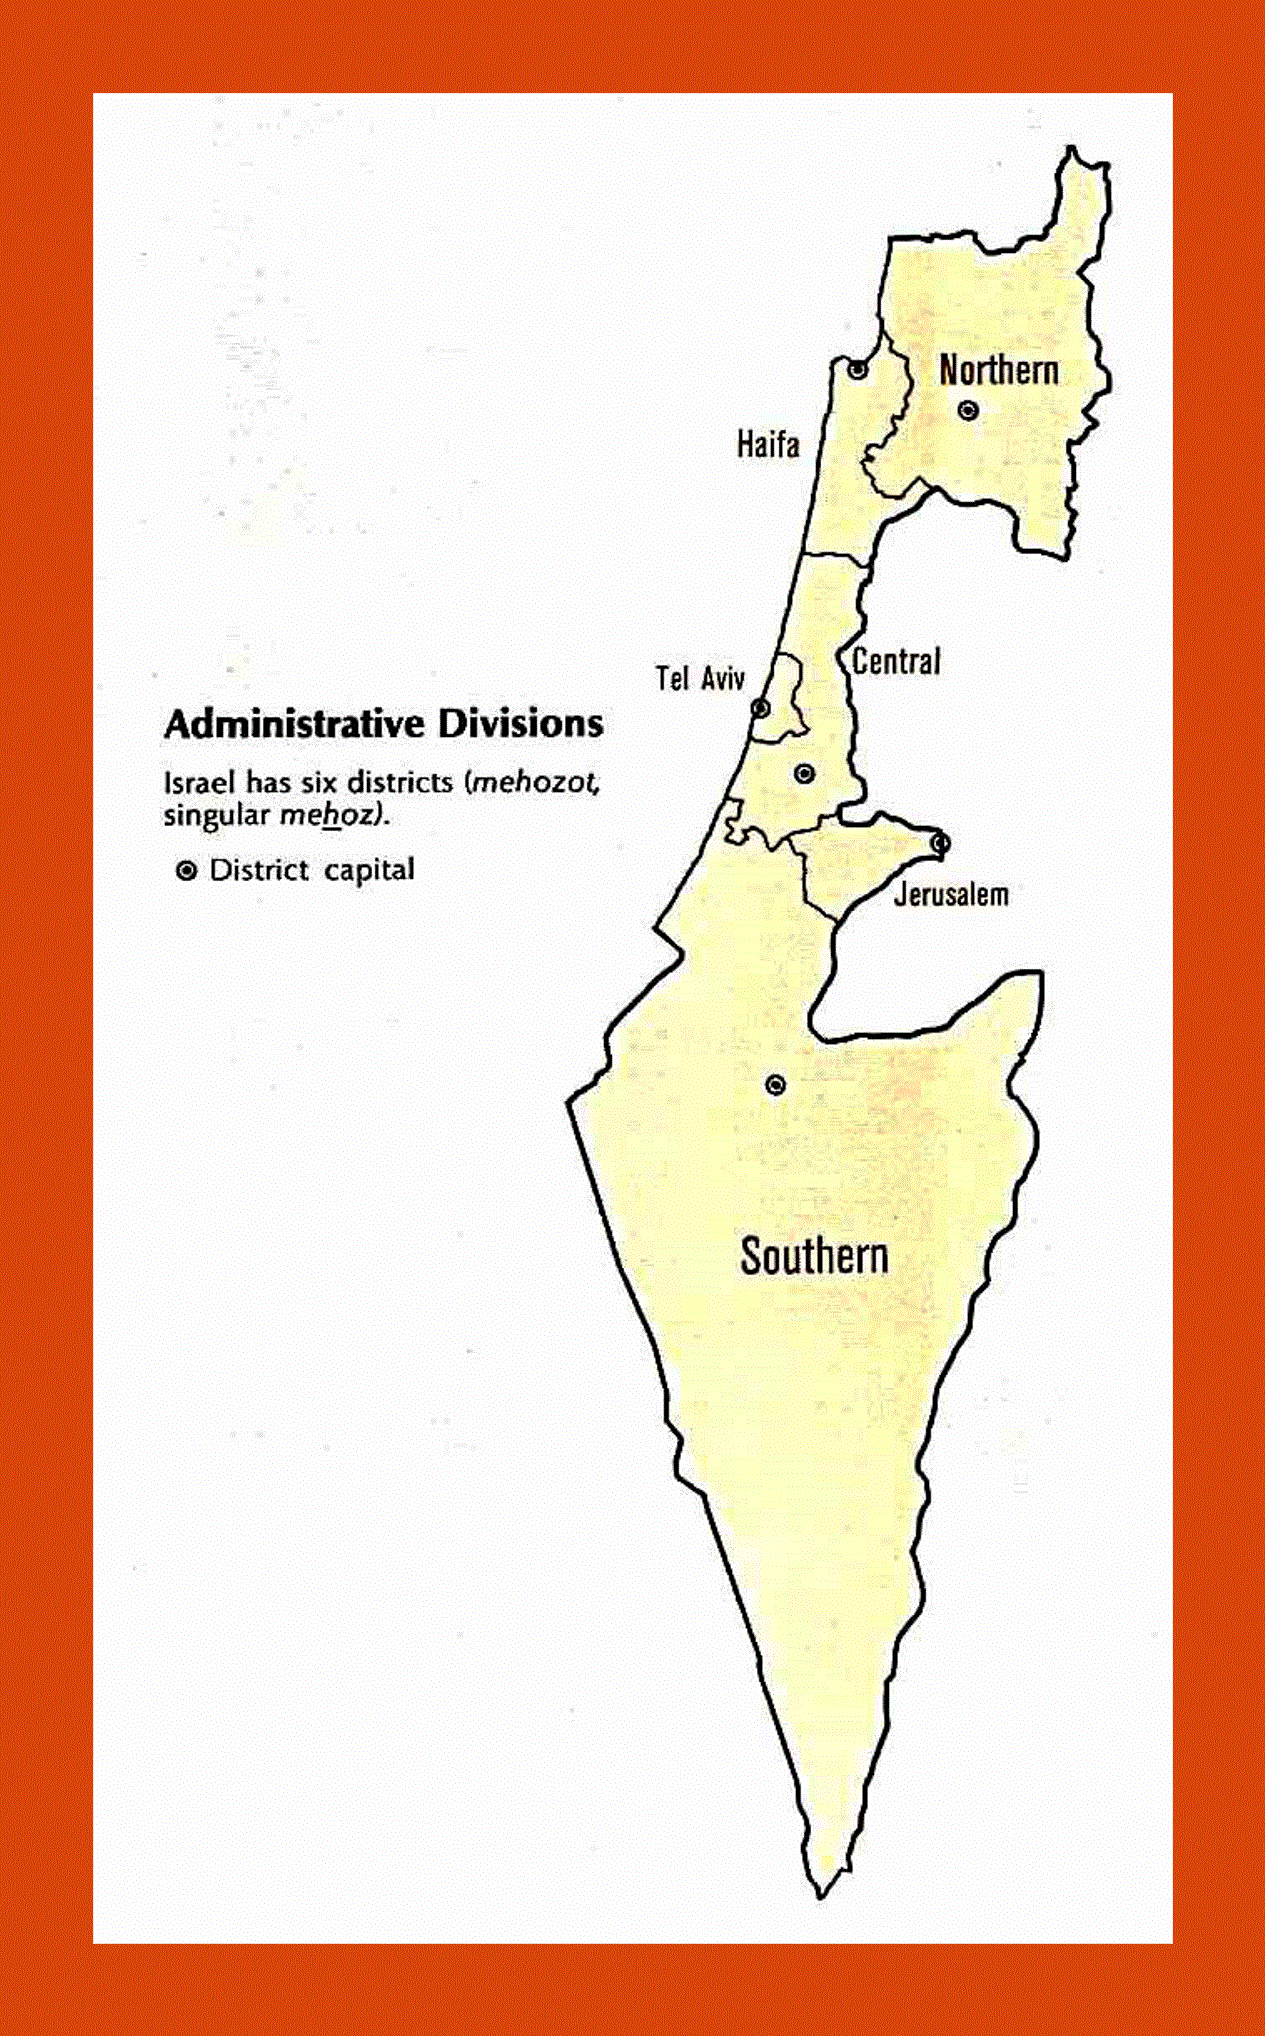 Administrative divisions map of Israel